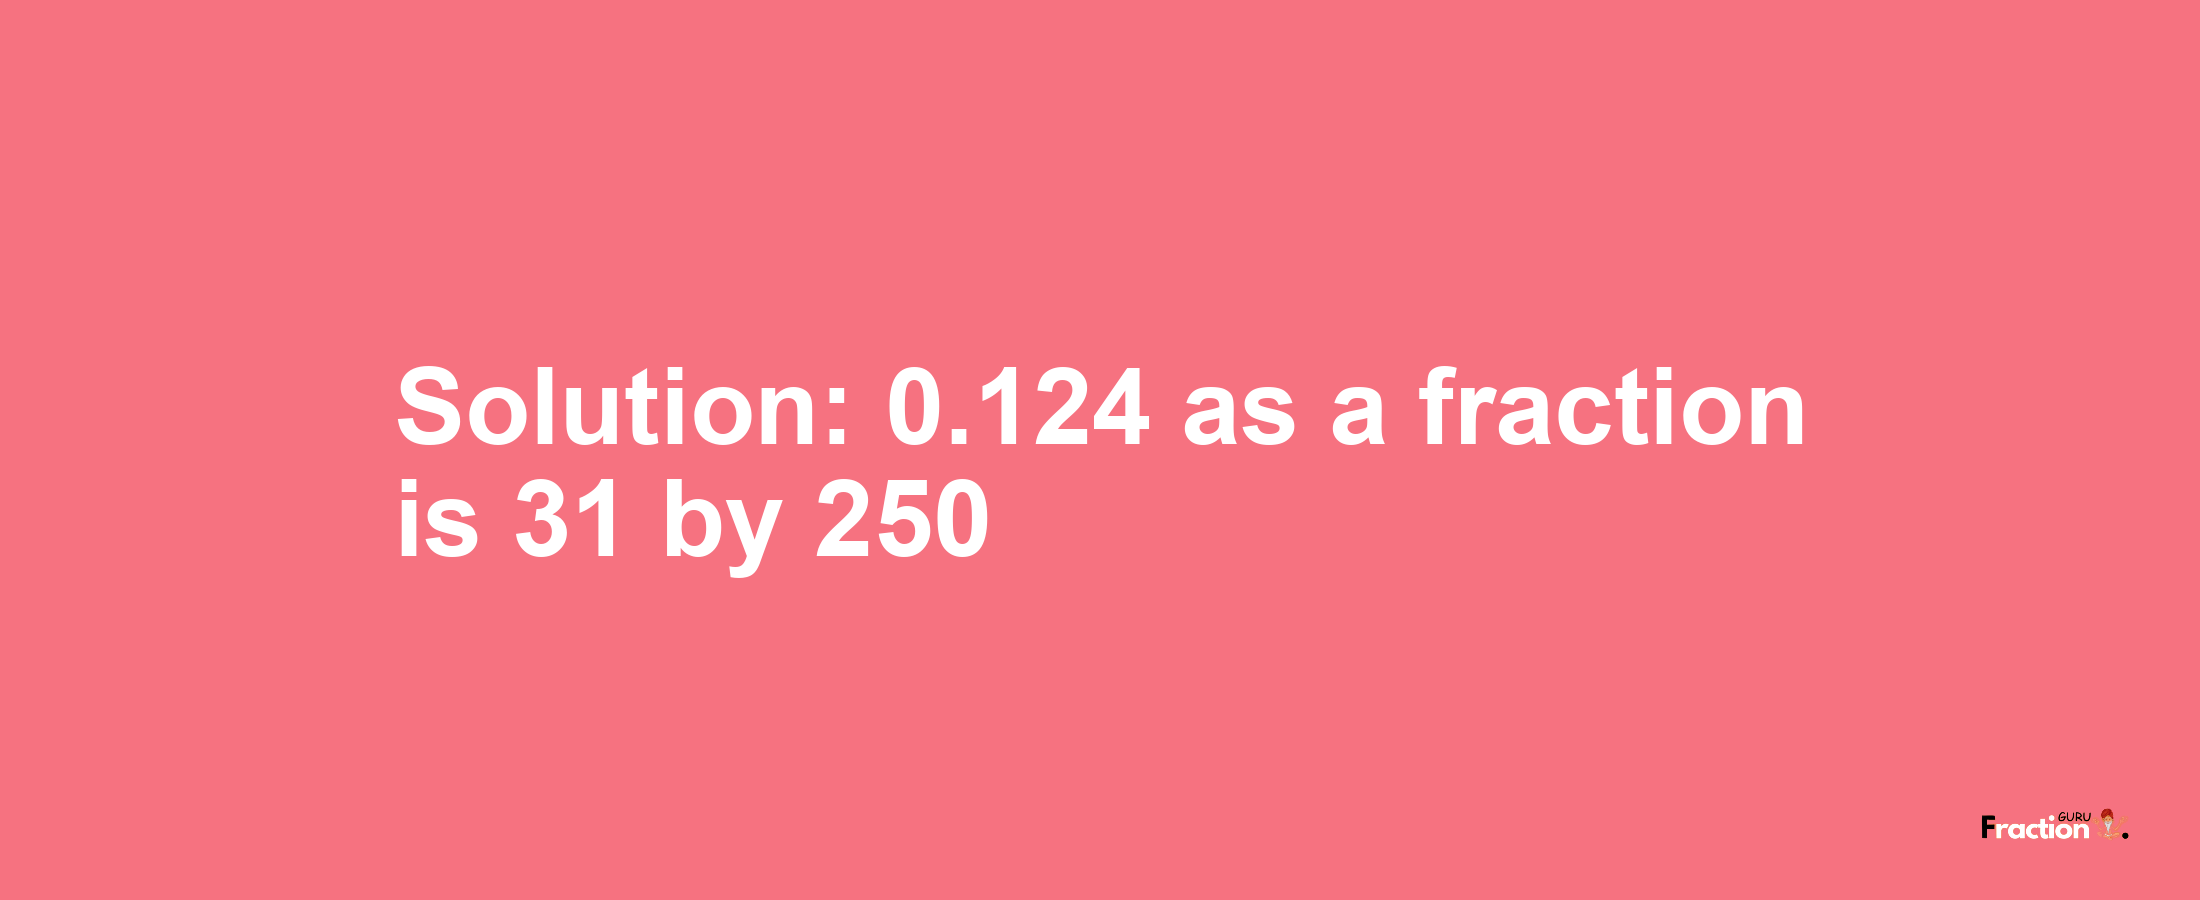 Solution:0.124 as a fraction is 31/250